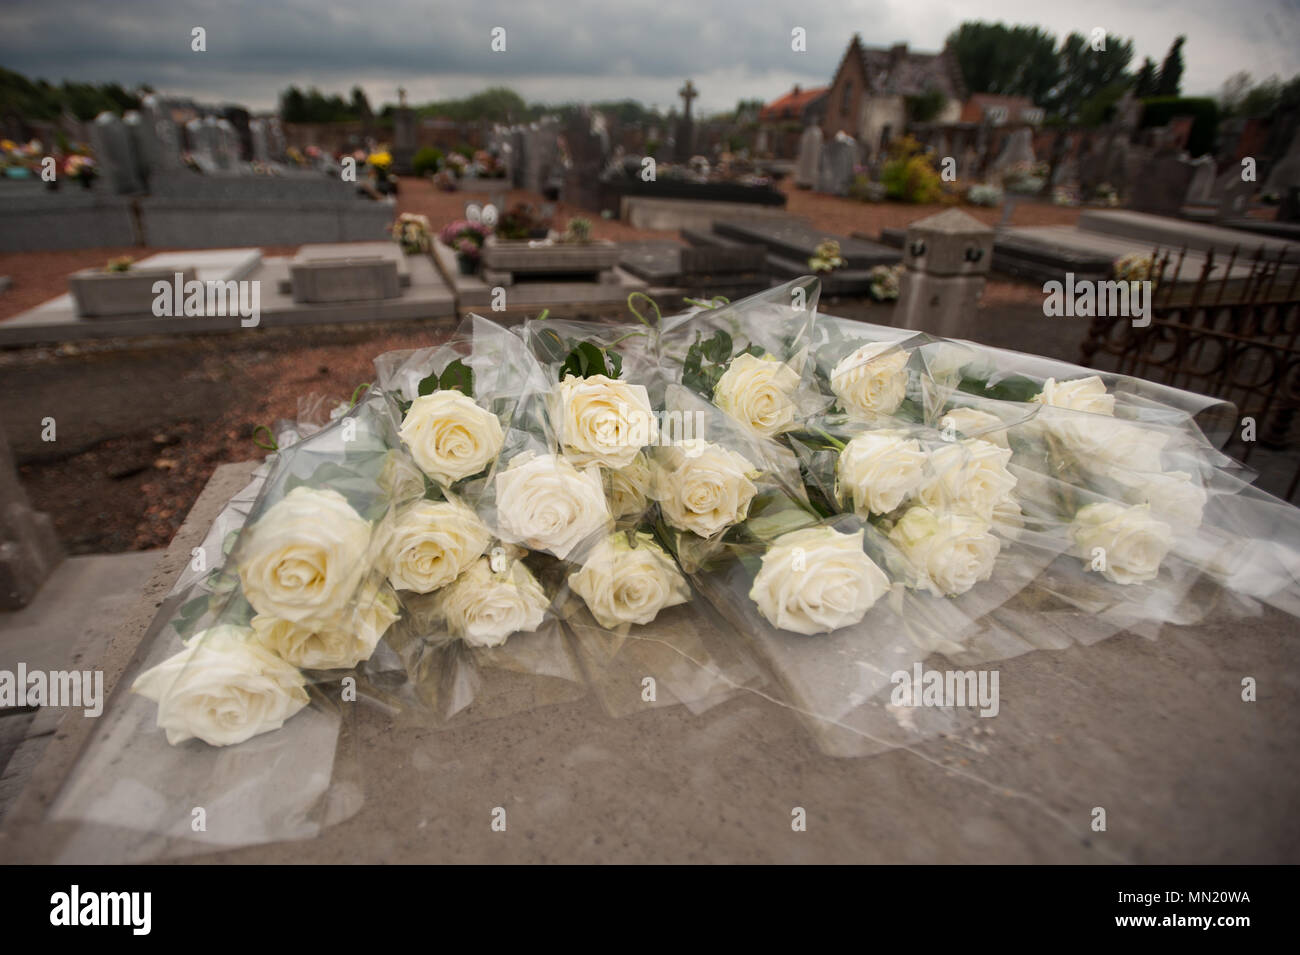 Flowers were laid at Belgian Lt. Col. Joseph Daumerie's gravemarker during a memorial ceremony, Aug. 15, 2017, Brugelette, Belgium. The memorial commemorates the 75th anniversary of Daumerie's death. Daumerie is a war hero and fighter pilot who was executed in 1942 during World War II. The event offered a unique opportunity for the U.S. service members to honor a fallen hero and strengthen their relationship with NATO allies during the U.S. Army Garrison Benelux's 50th anniversary in Belgium. (U.S. Navy Photo by Information System Technician Seaman Daniel Gallegos/Released) Stock Photo